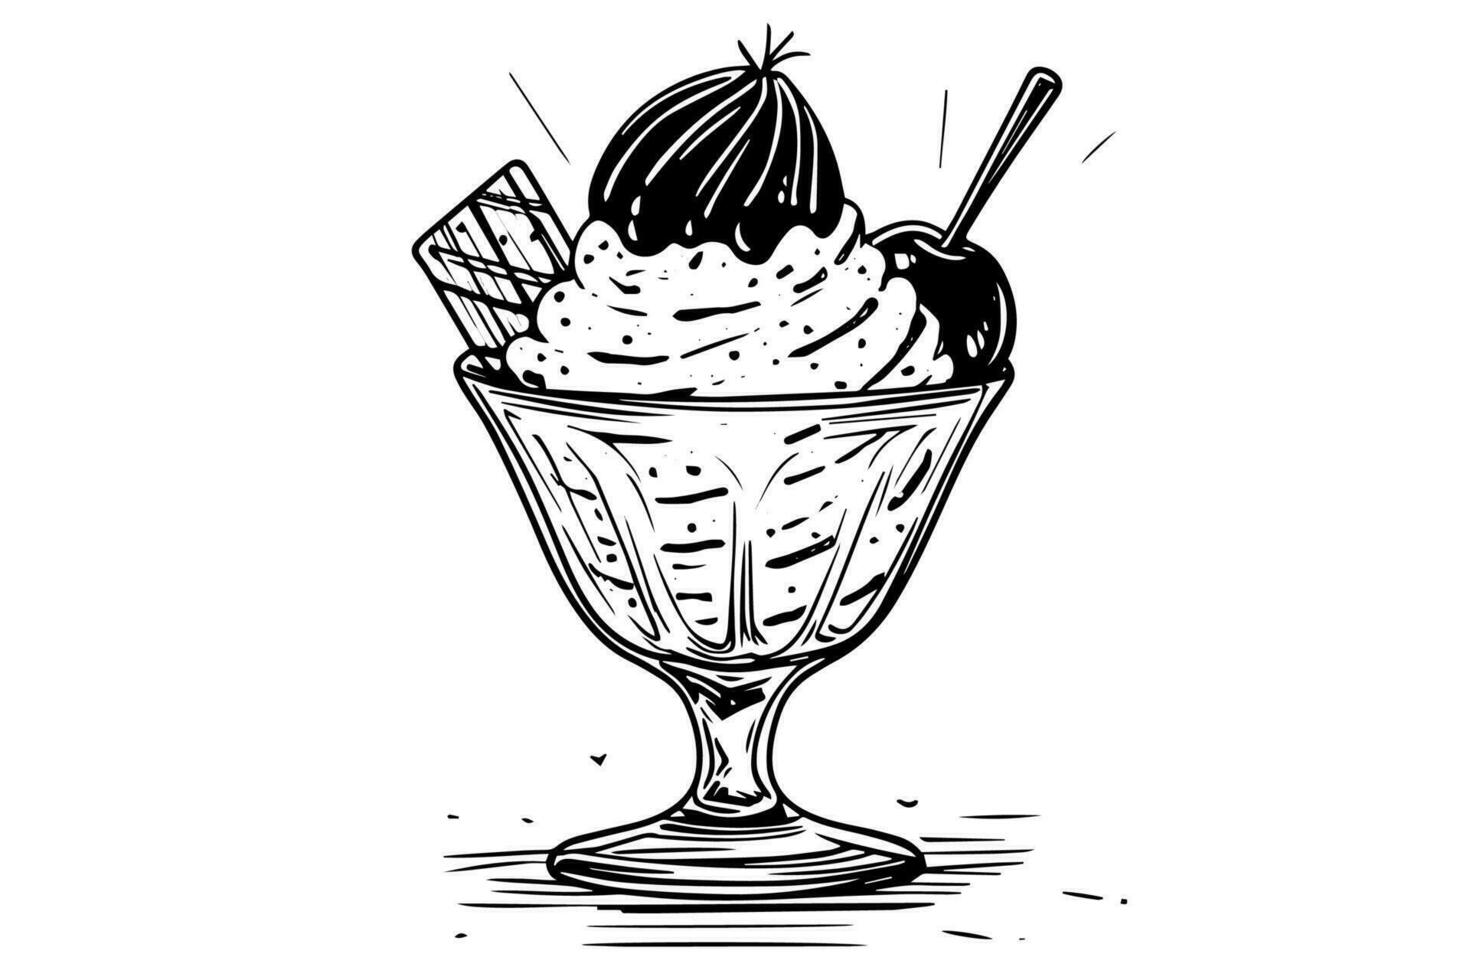 Ice cream scoops with berries and wafer sticks in glass cup. Ink sketch engraved vector illustration.